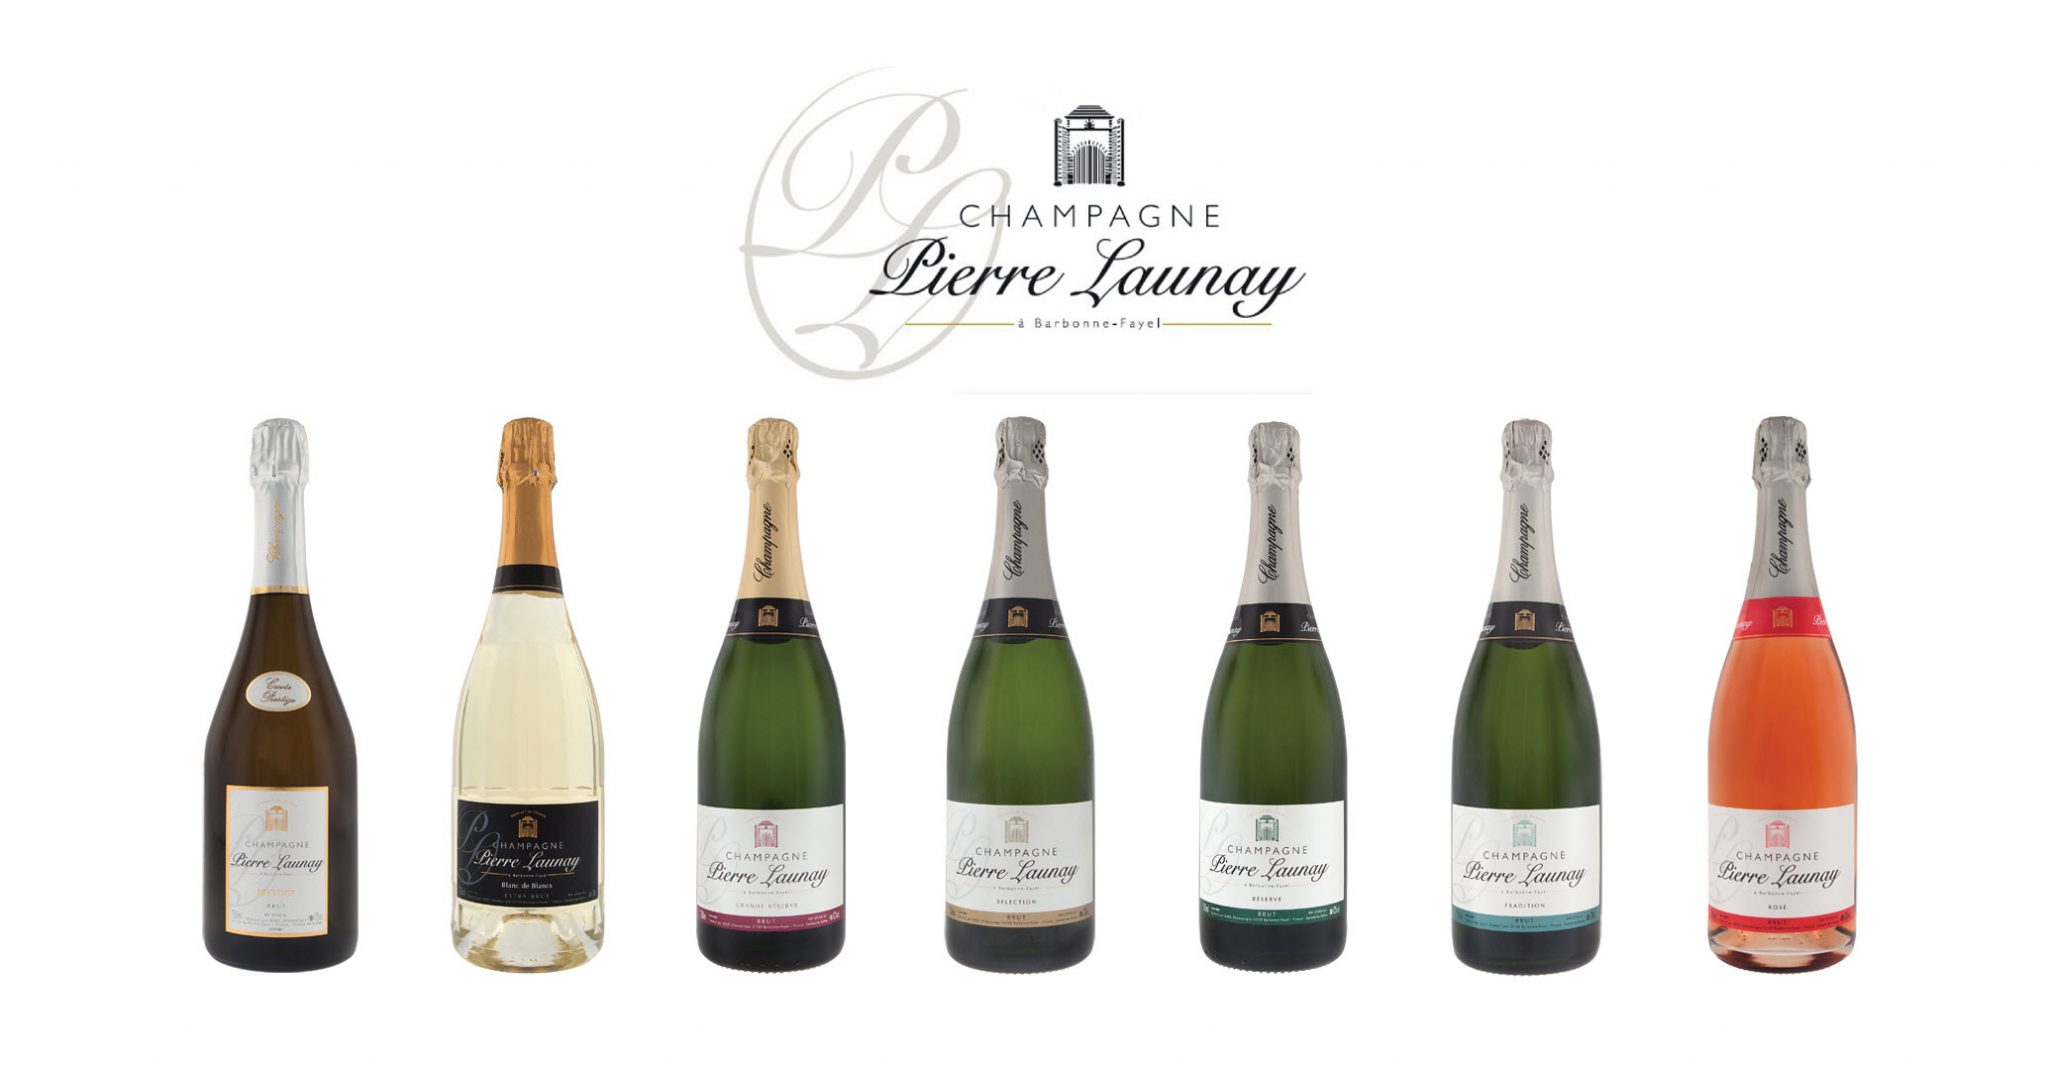 Champagne Pierre Launay